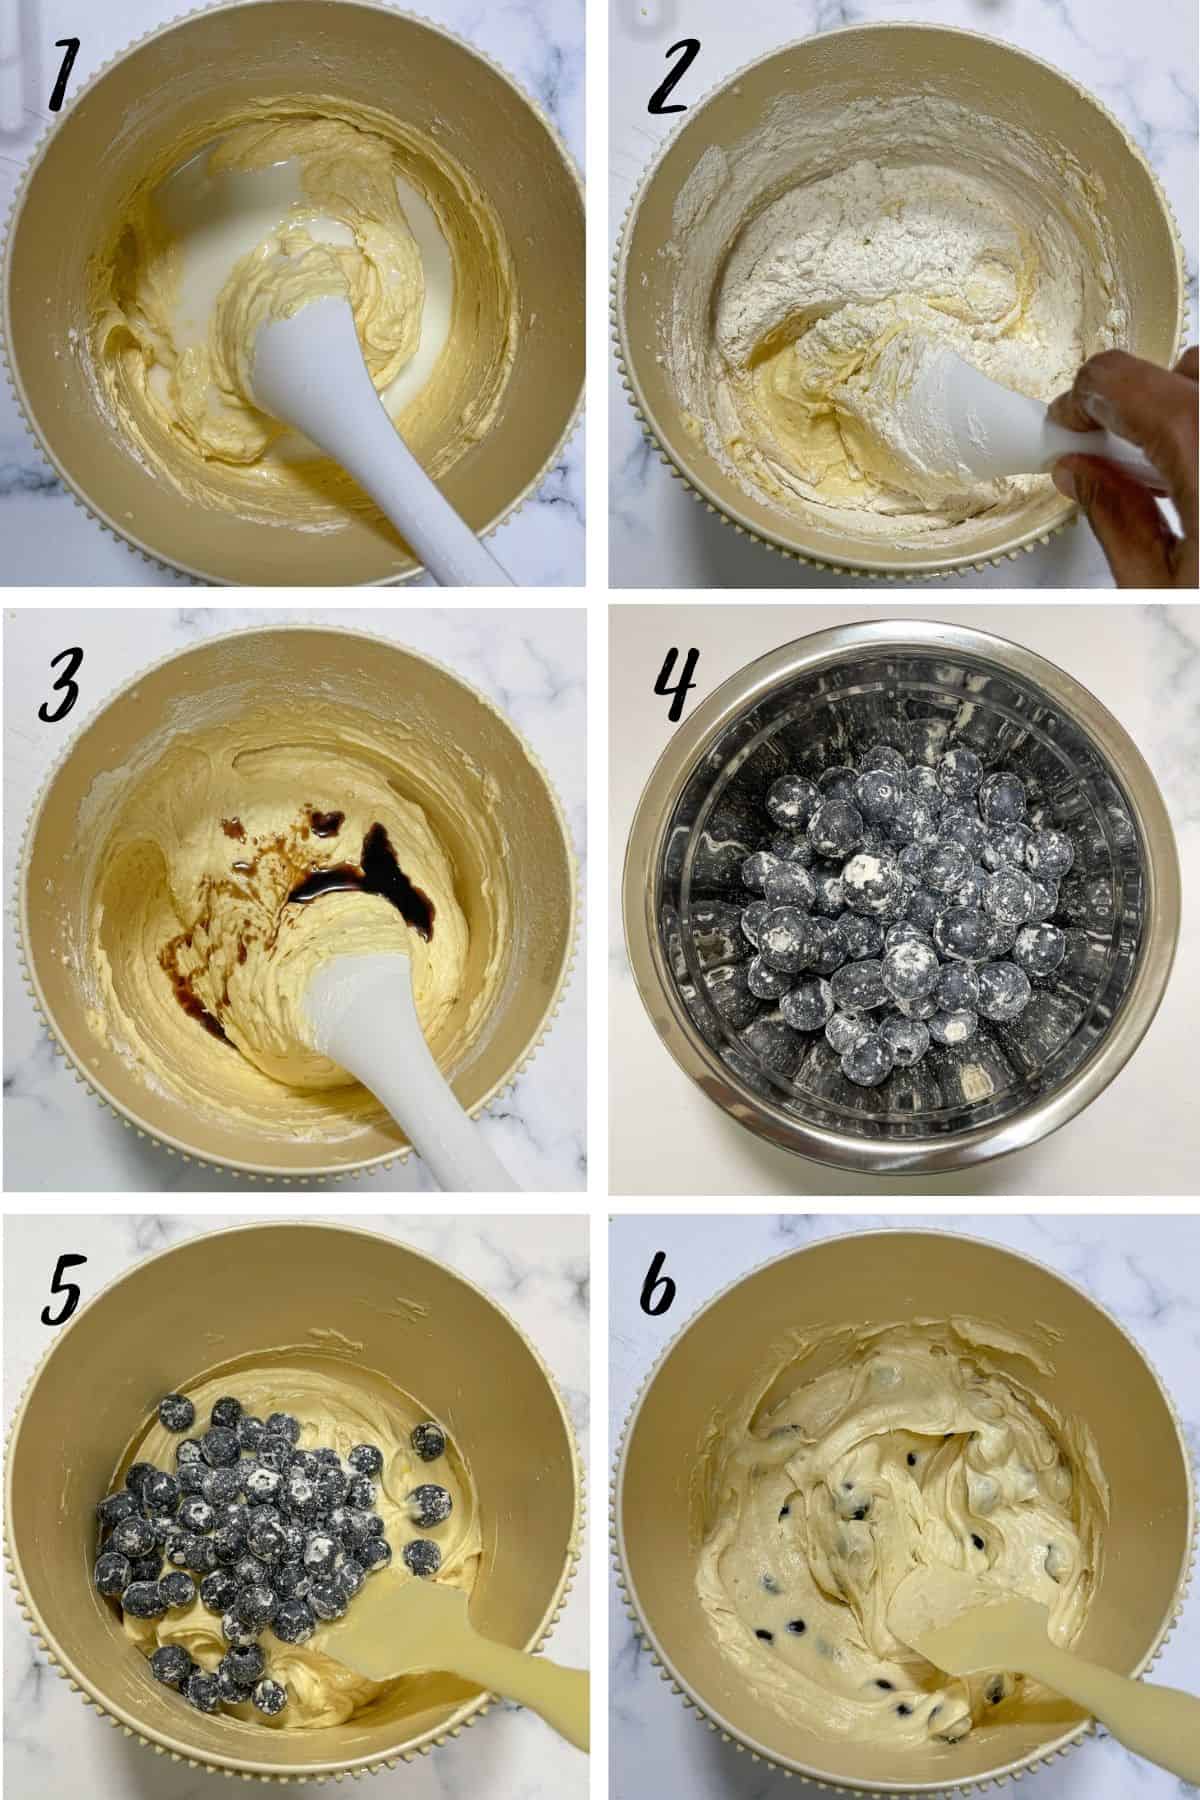 A poster of 6 images showing how to mix blueberries into cake batter.